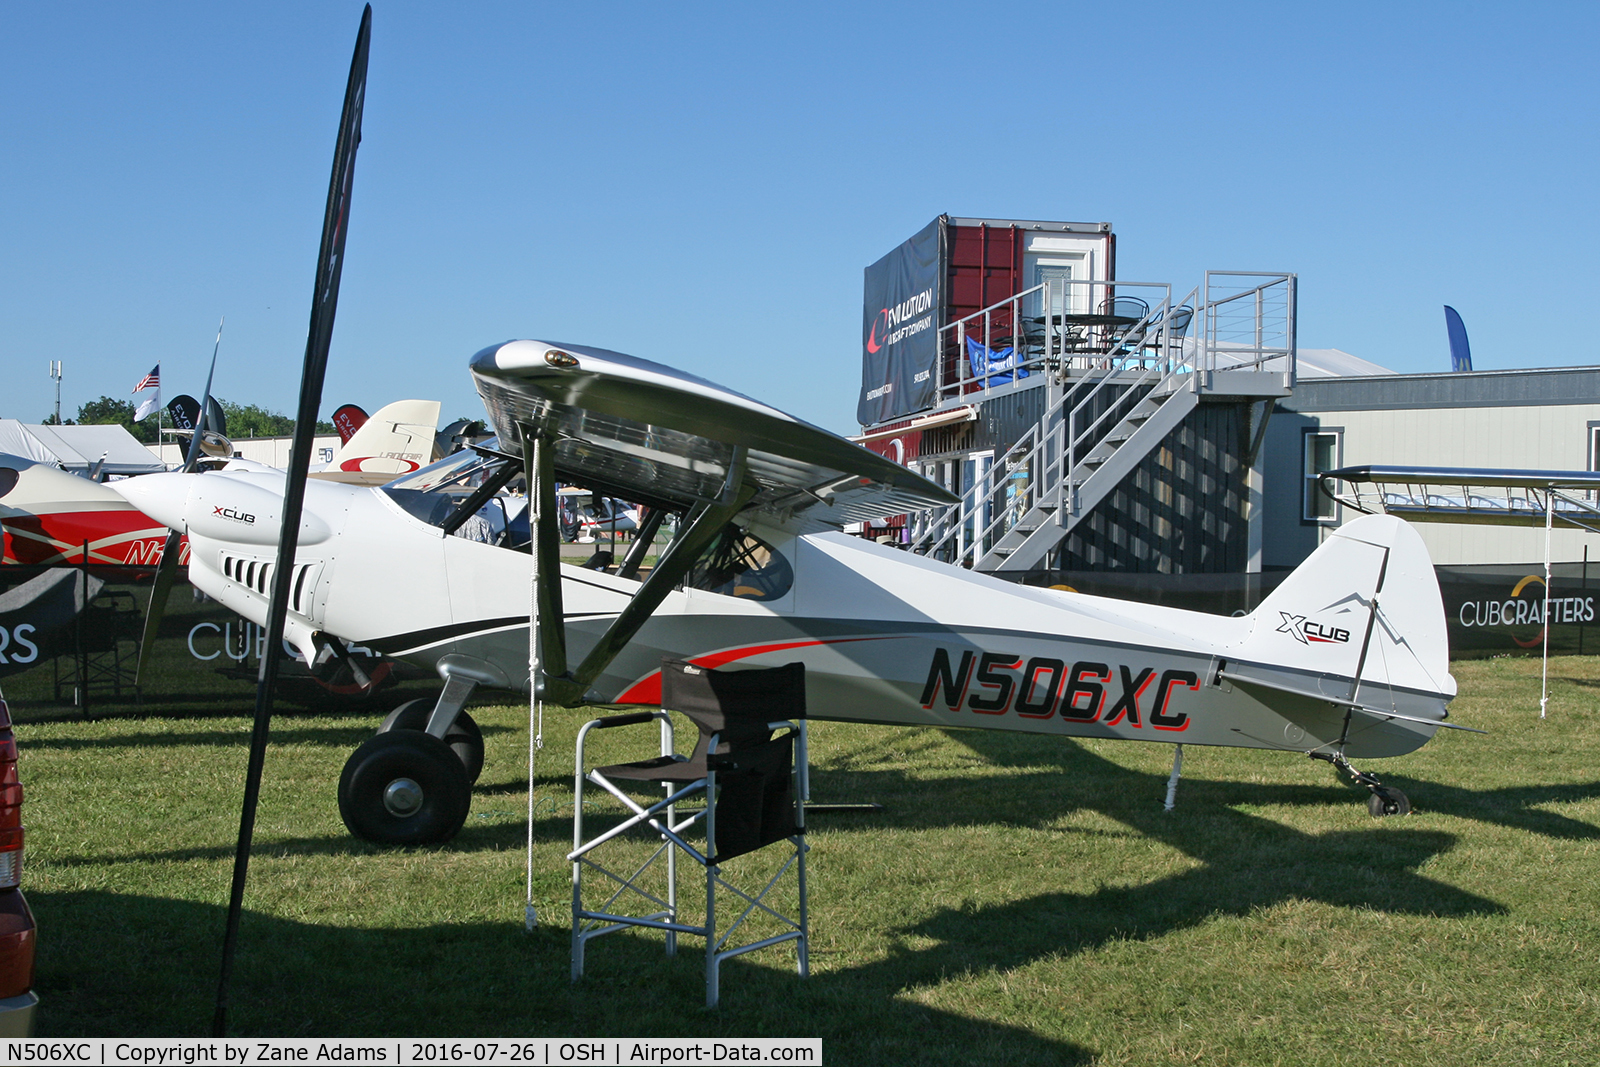 N506XC, 2016 Cub Crafters CC19-180 C/N CC19-0004, At the 2016 EAA AirVenture - Oshkosh, Wisconsin